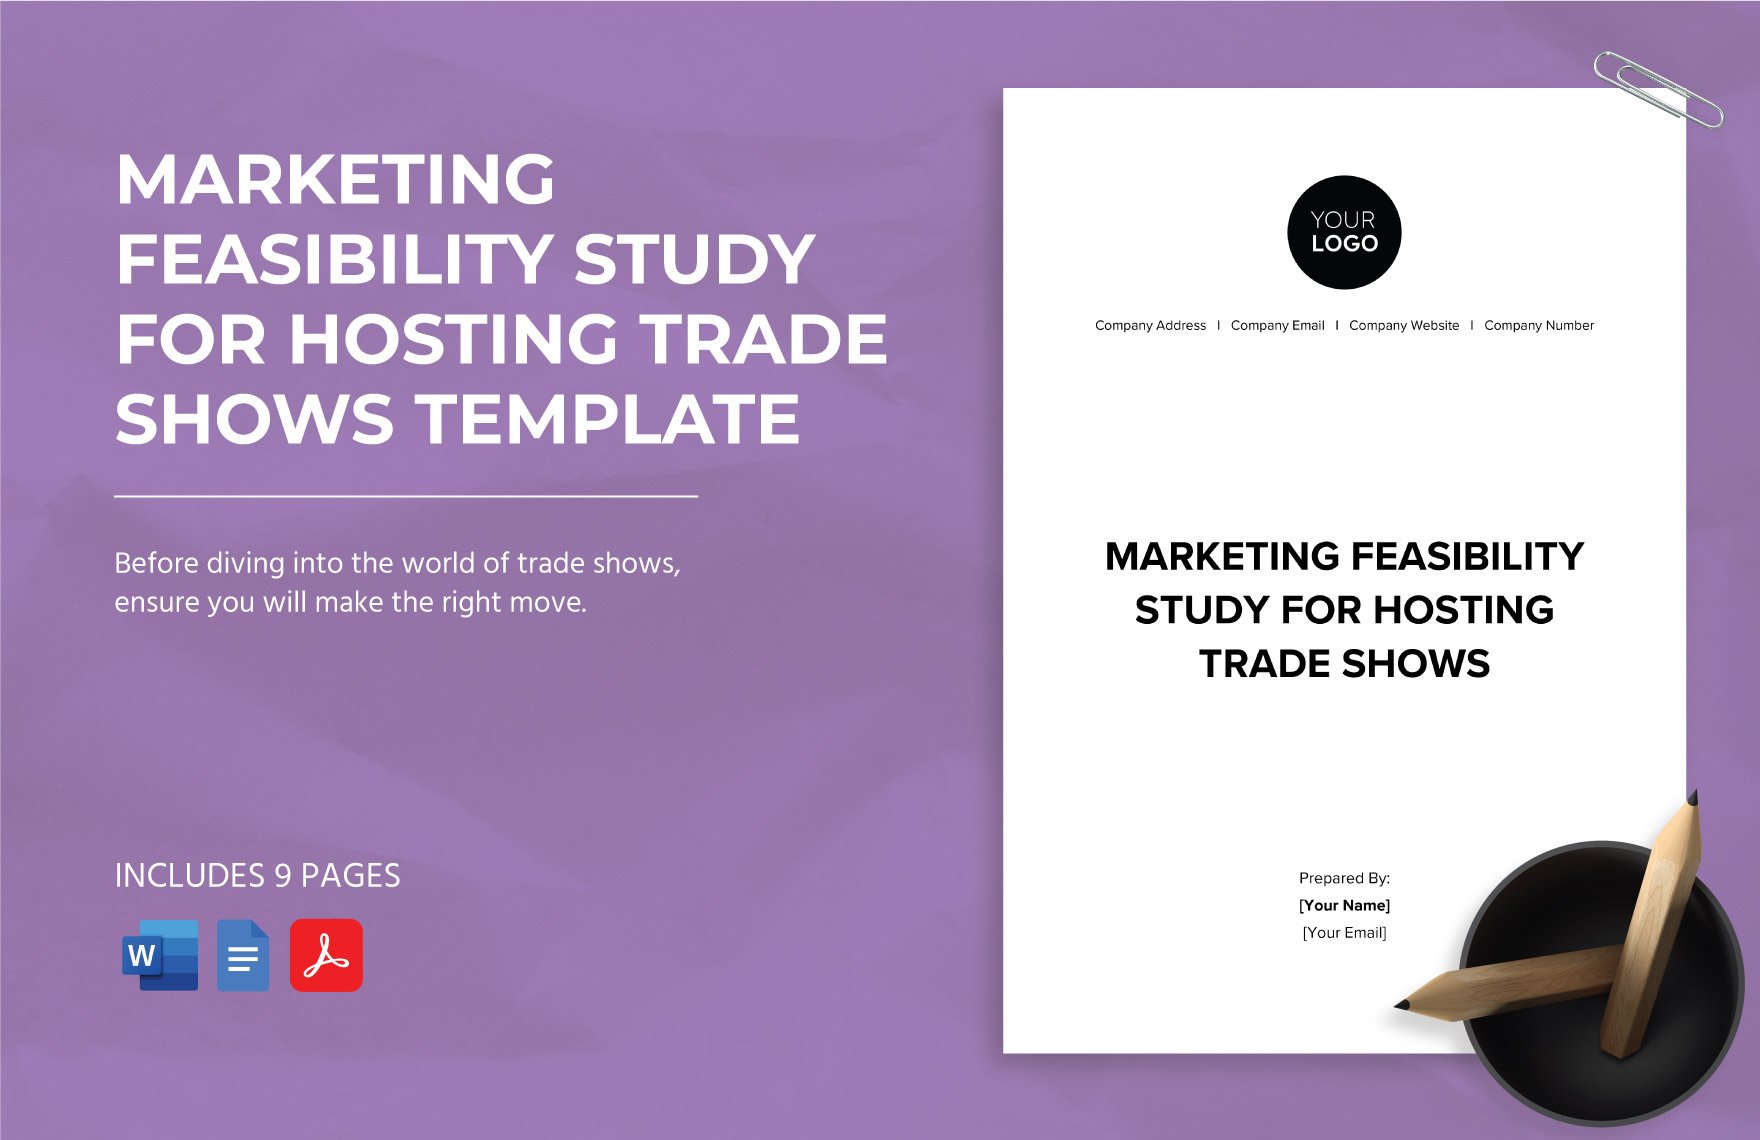 Marketing Feasibility Study for Hosting Trade Shows Template